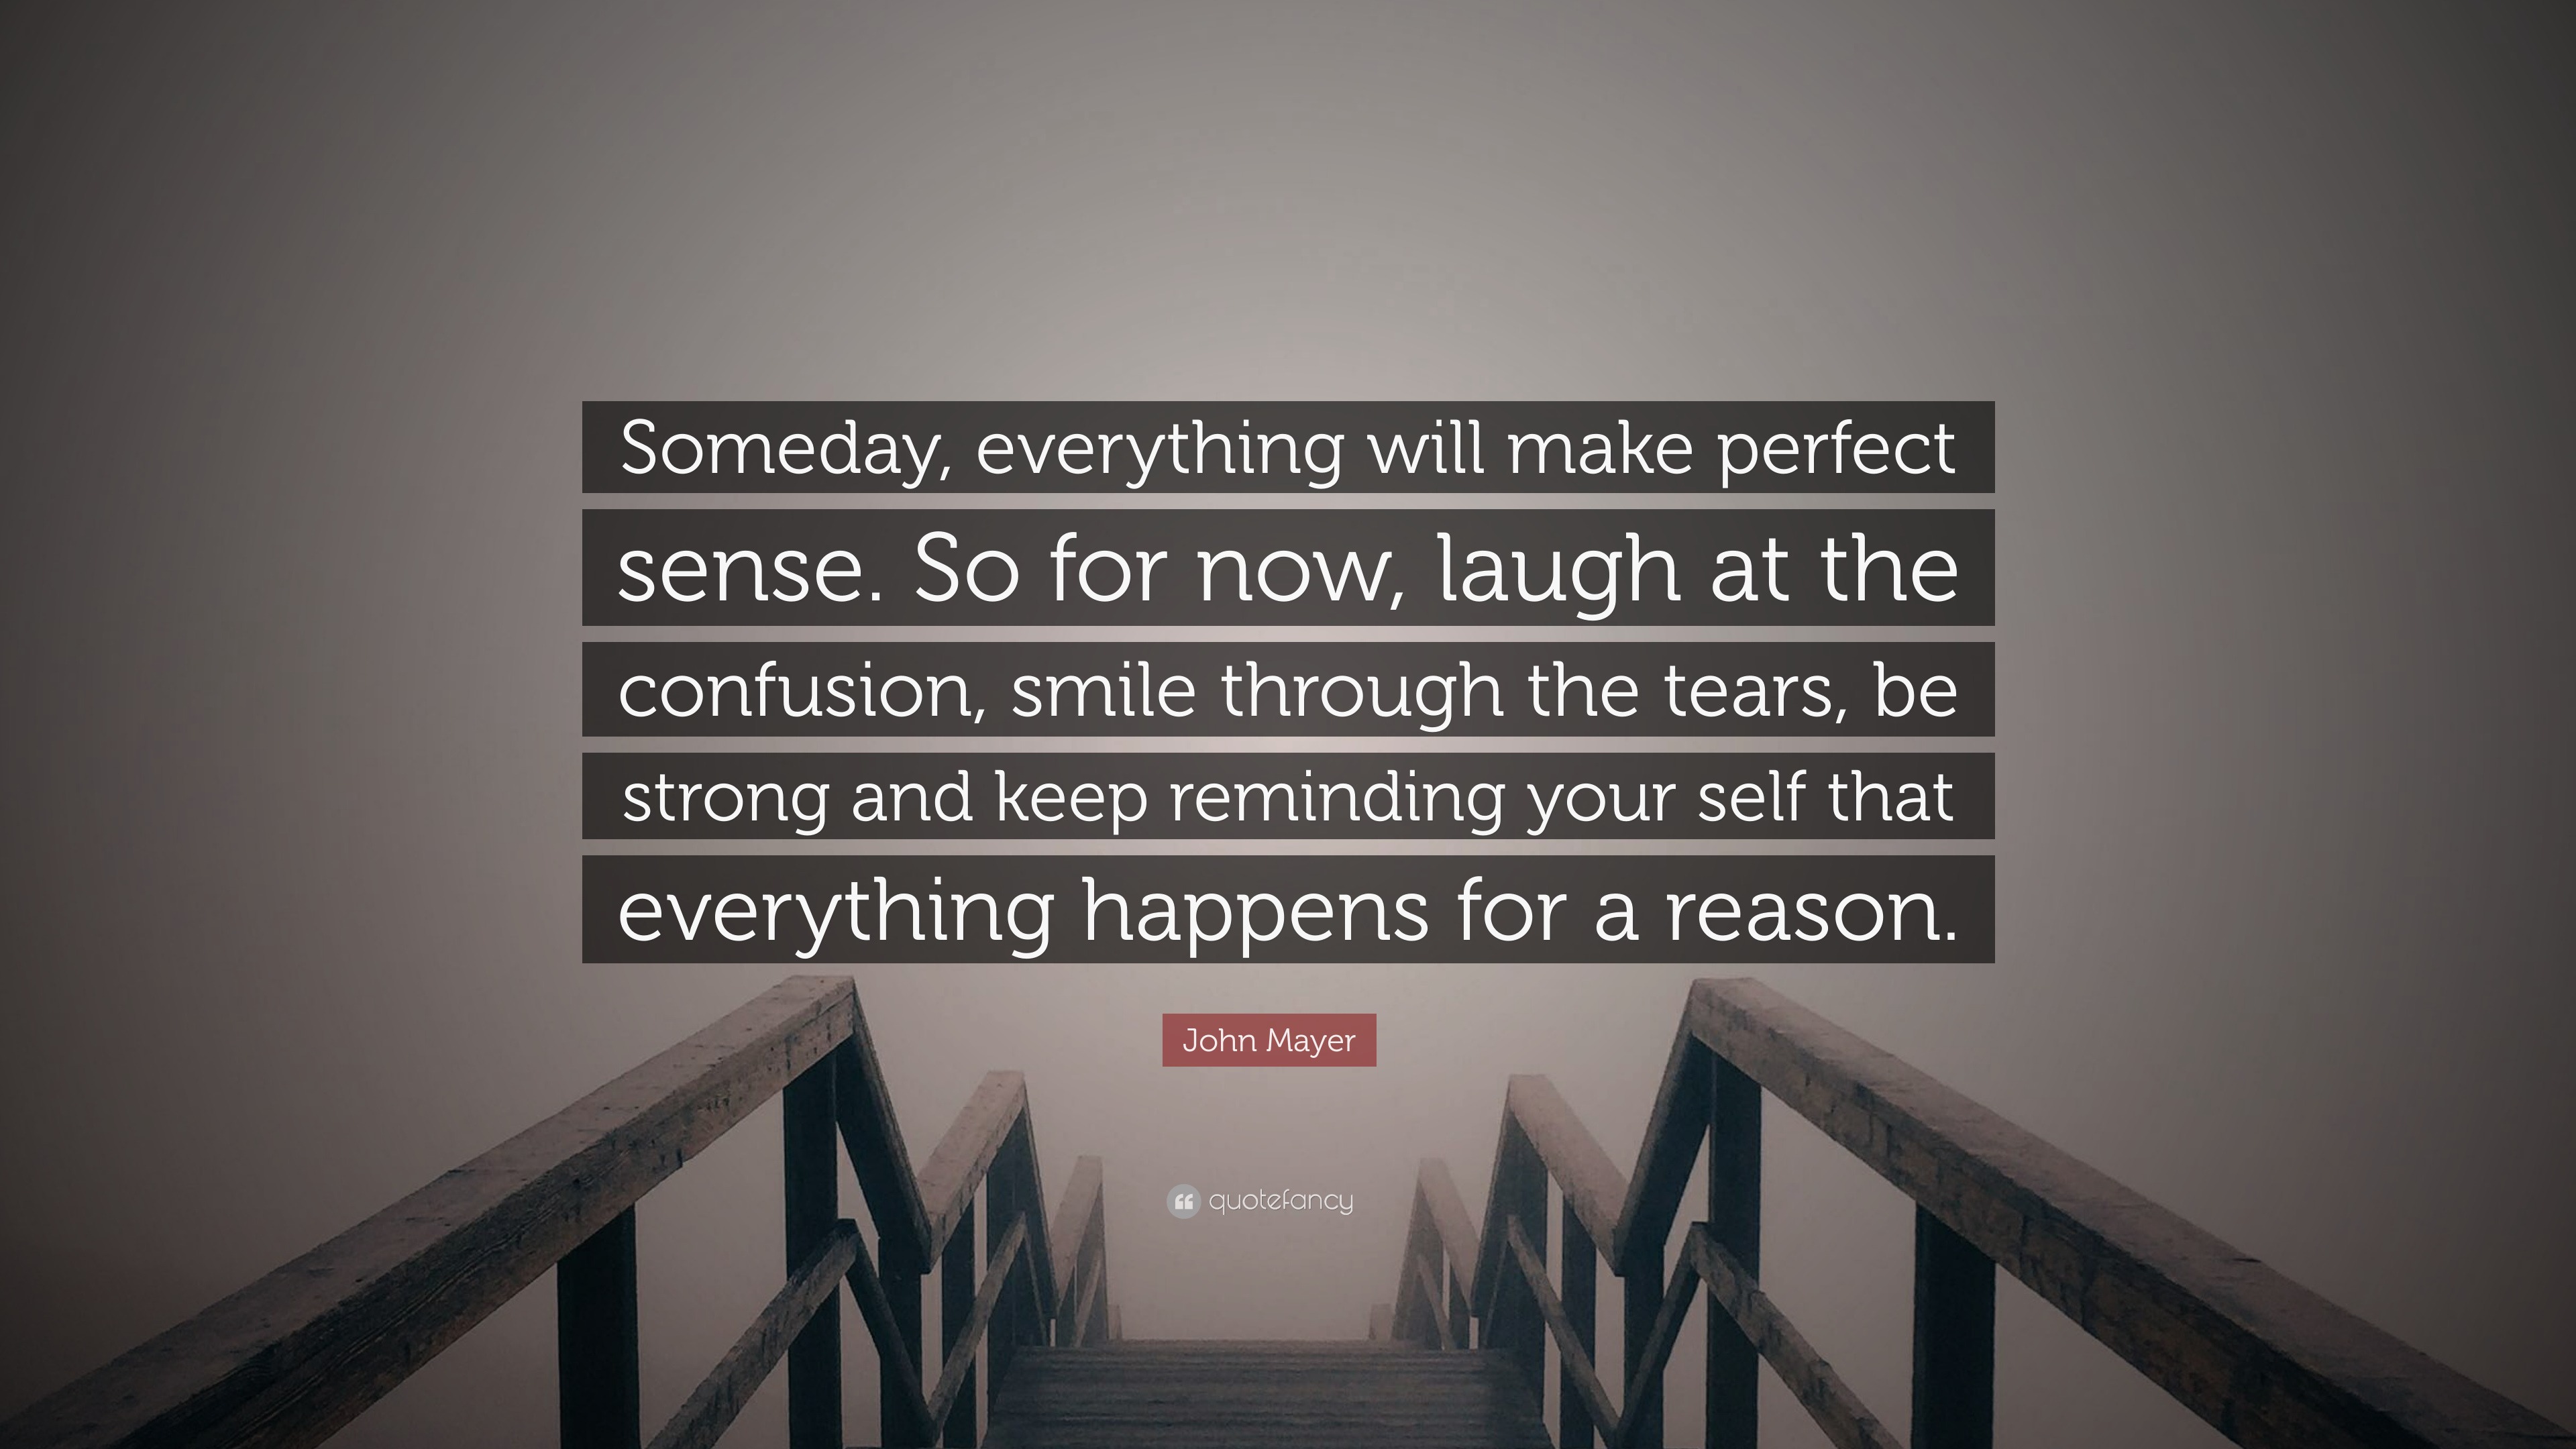 John Mayer Quote Someday Everything Will Make Perfect Sense So For Now Laugh At The Confusion Smile Through The Tears Be Strong And